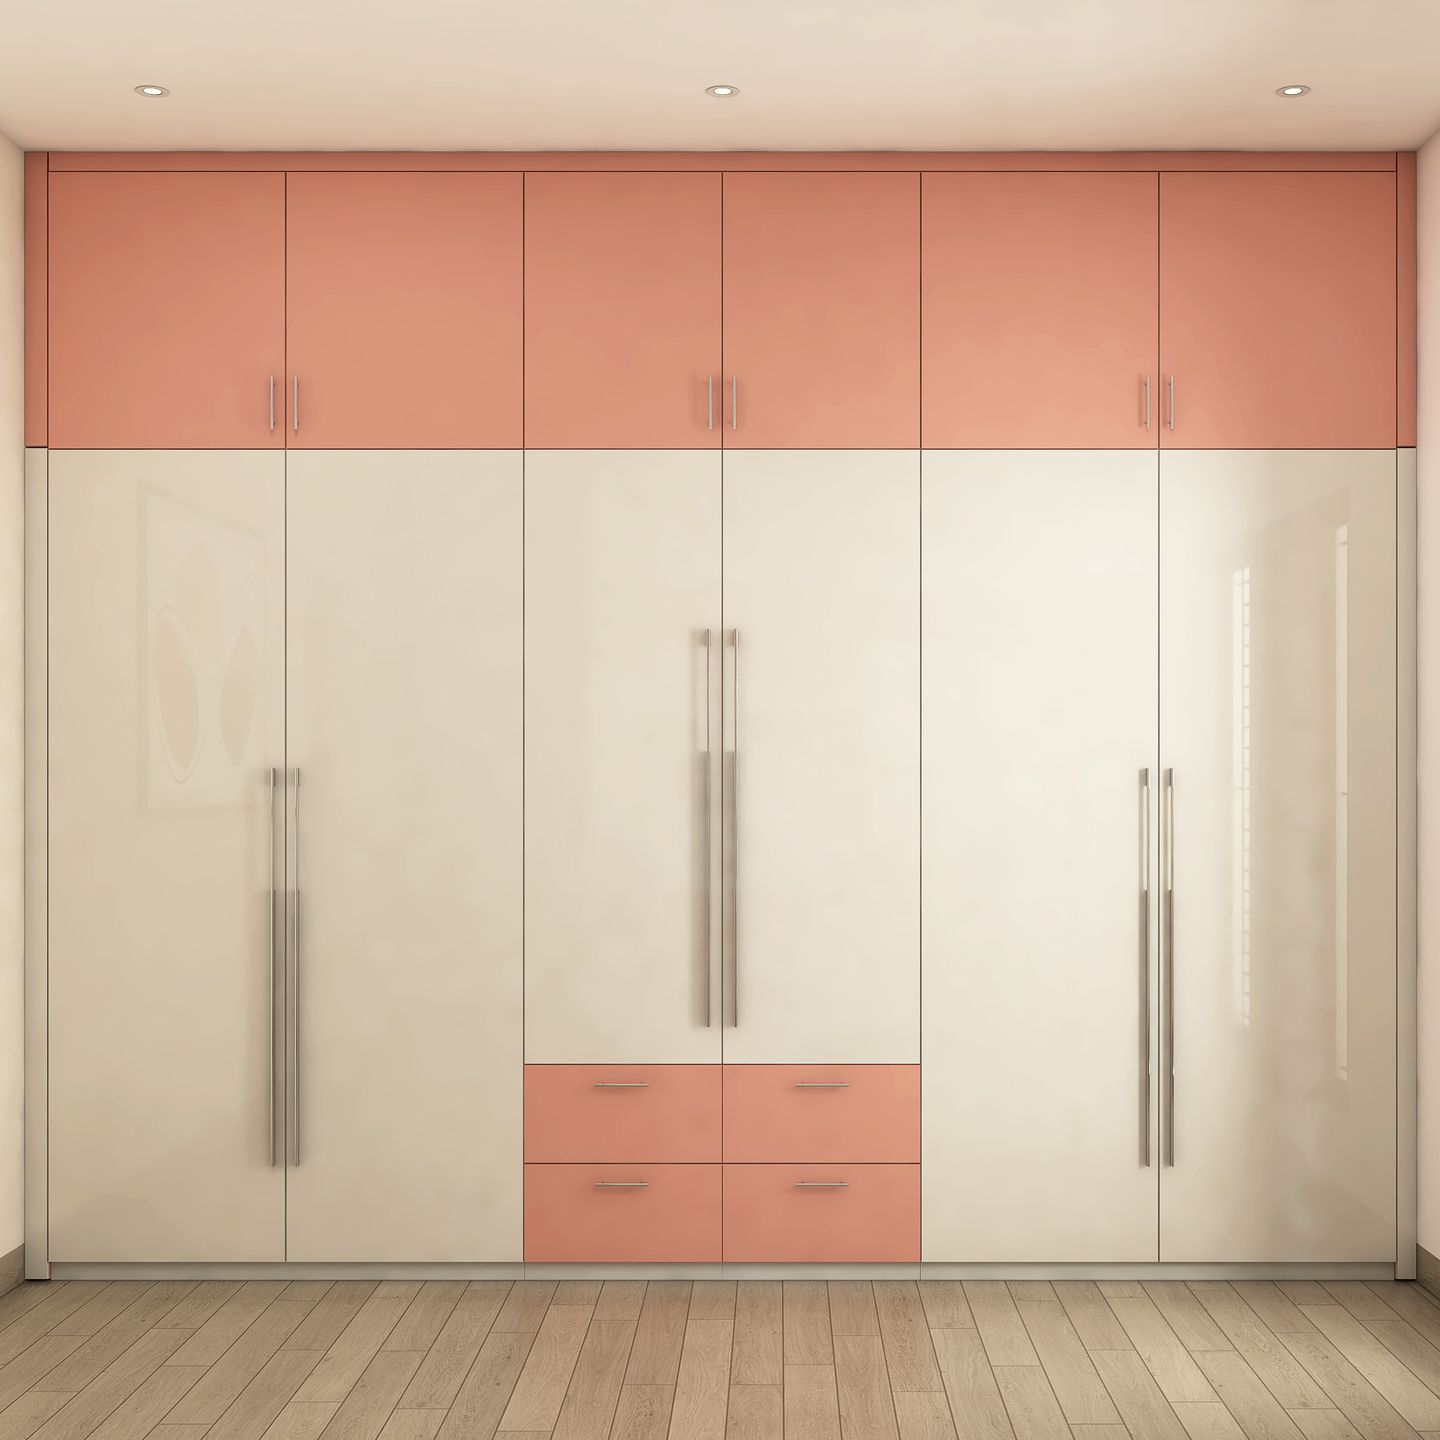 6-Door Wardrobe With Lofts And Drawers - Livspace